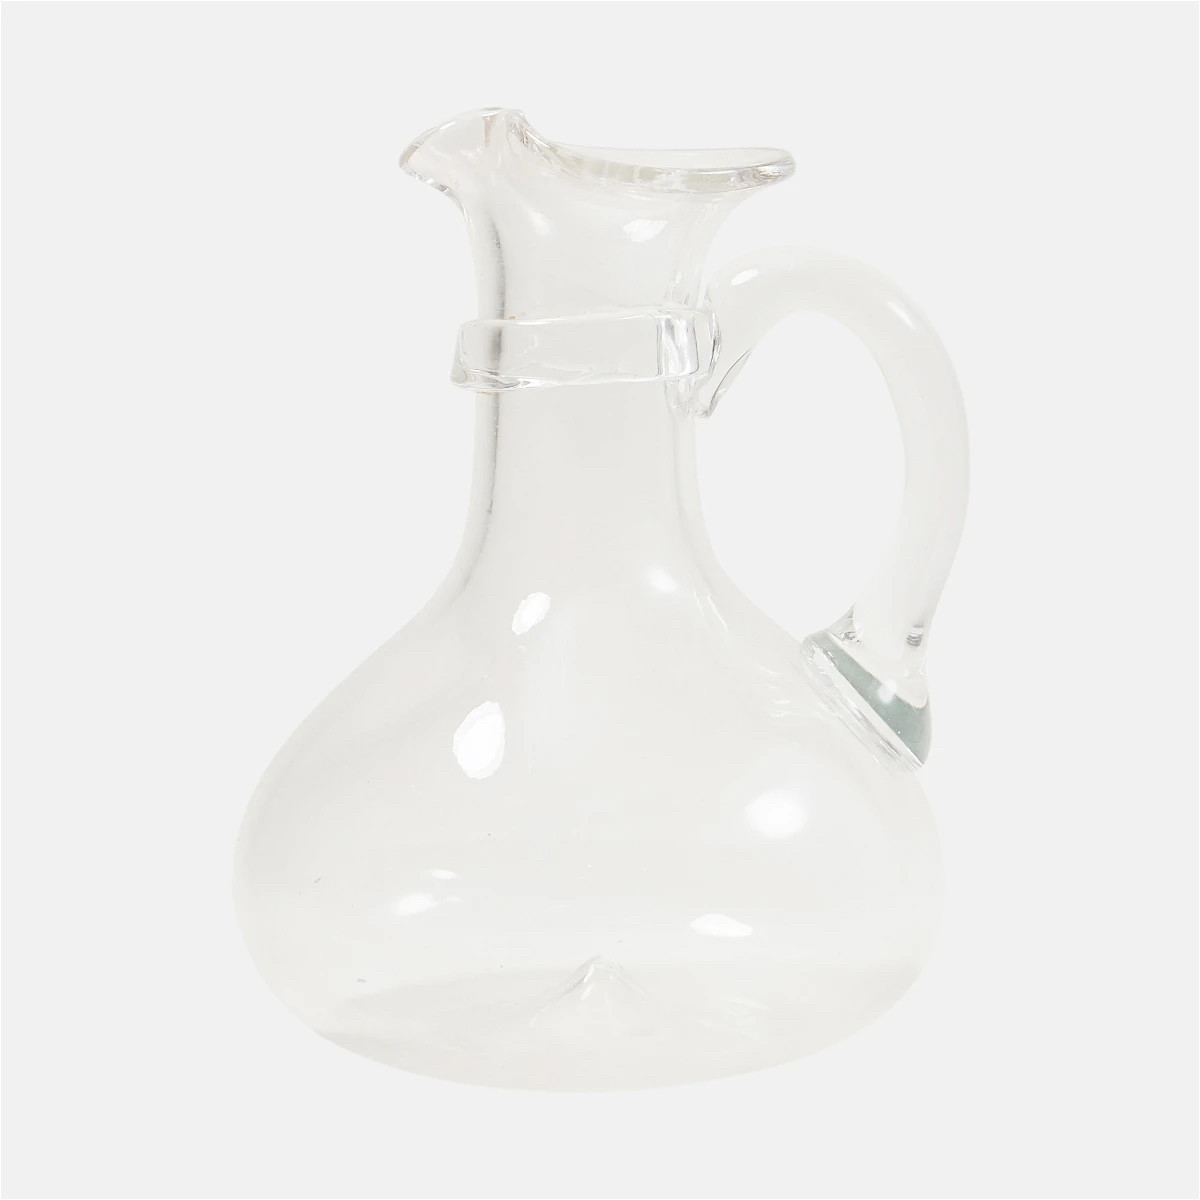 a clear glass vase with a handle on a white background